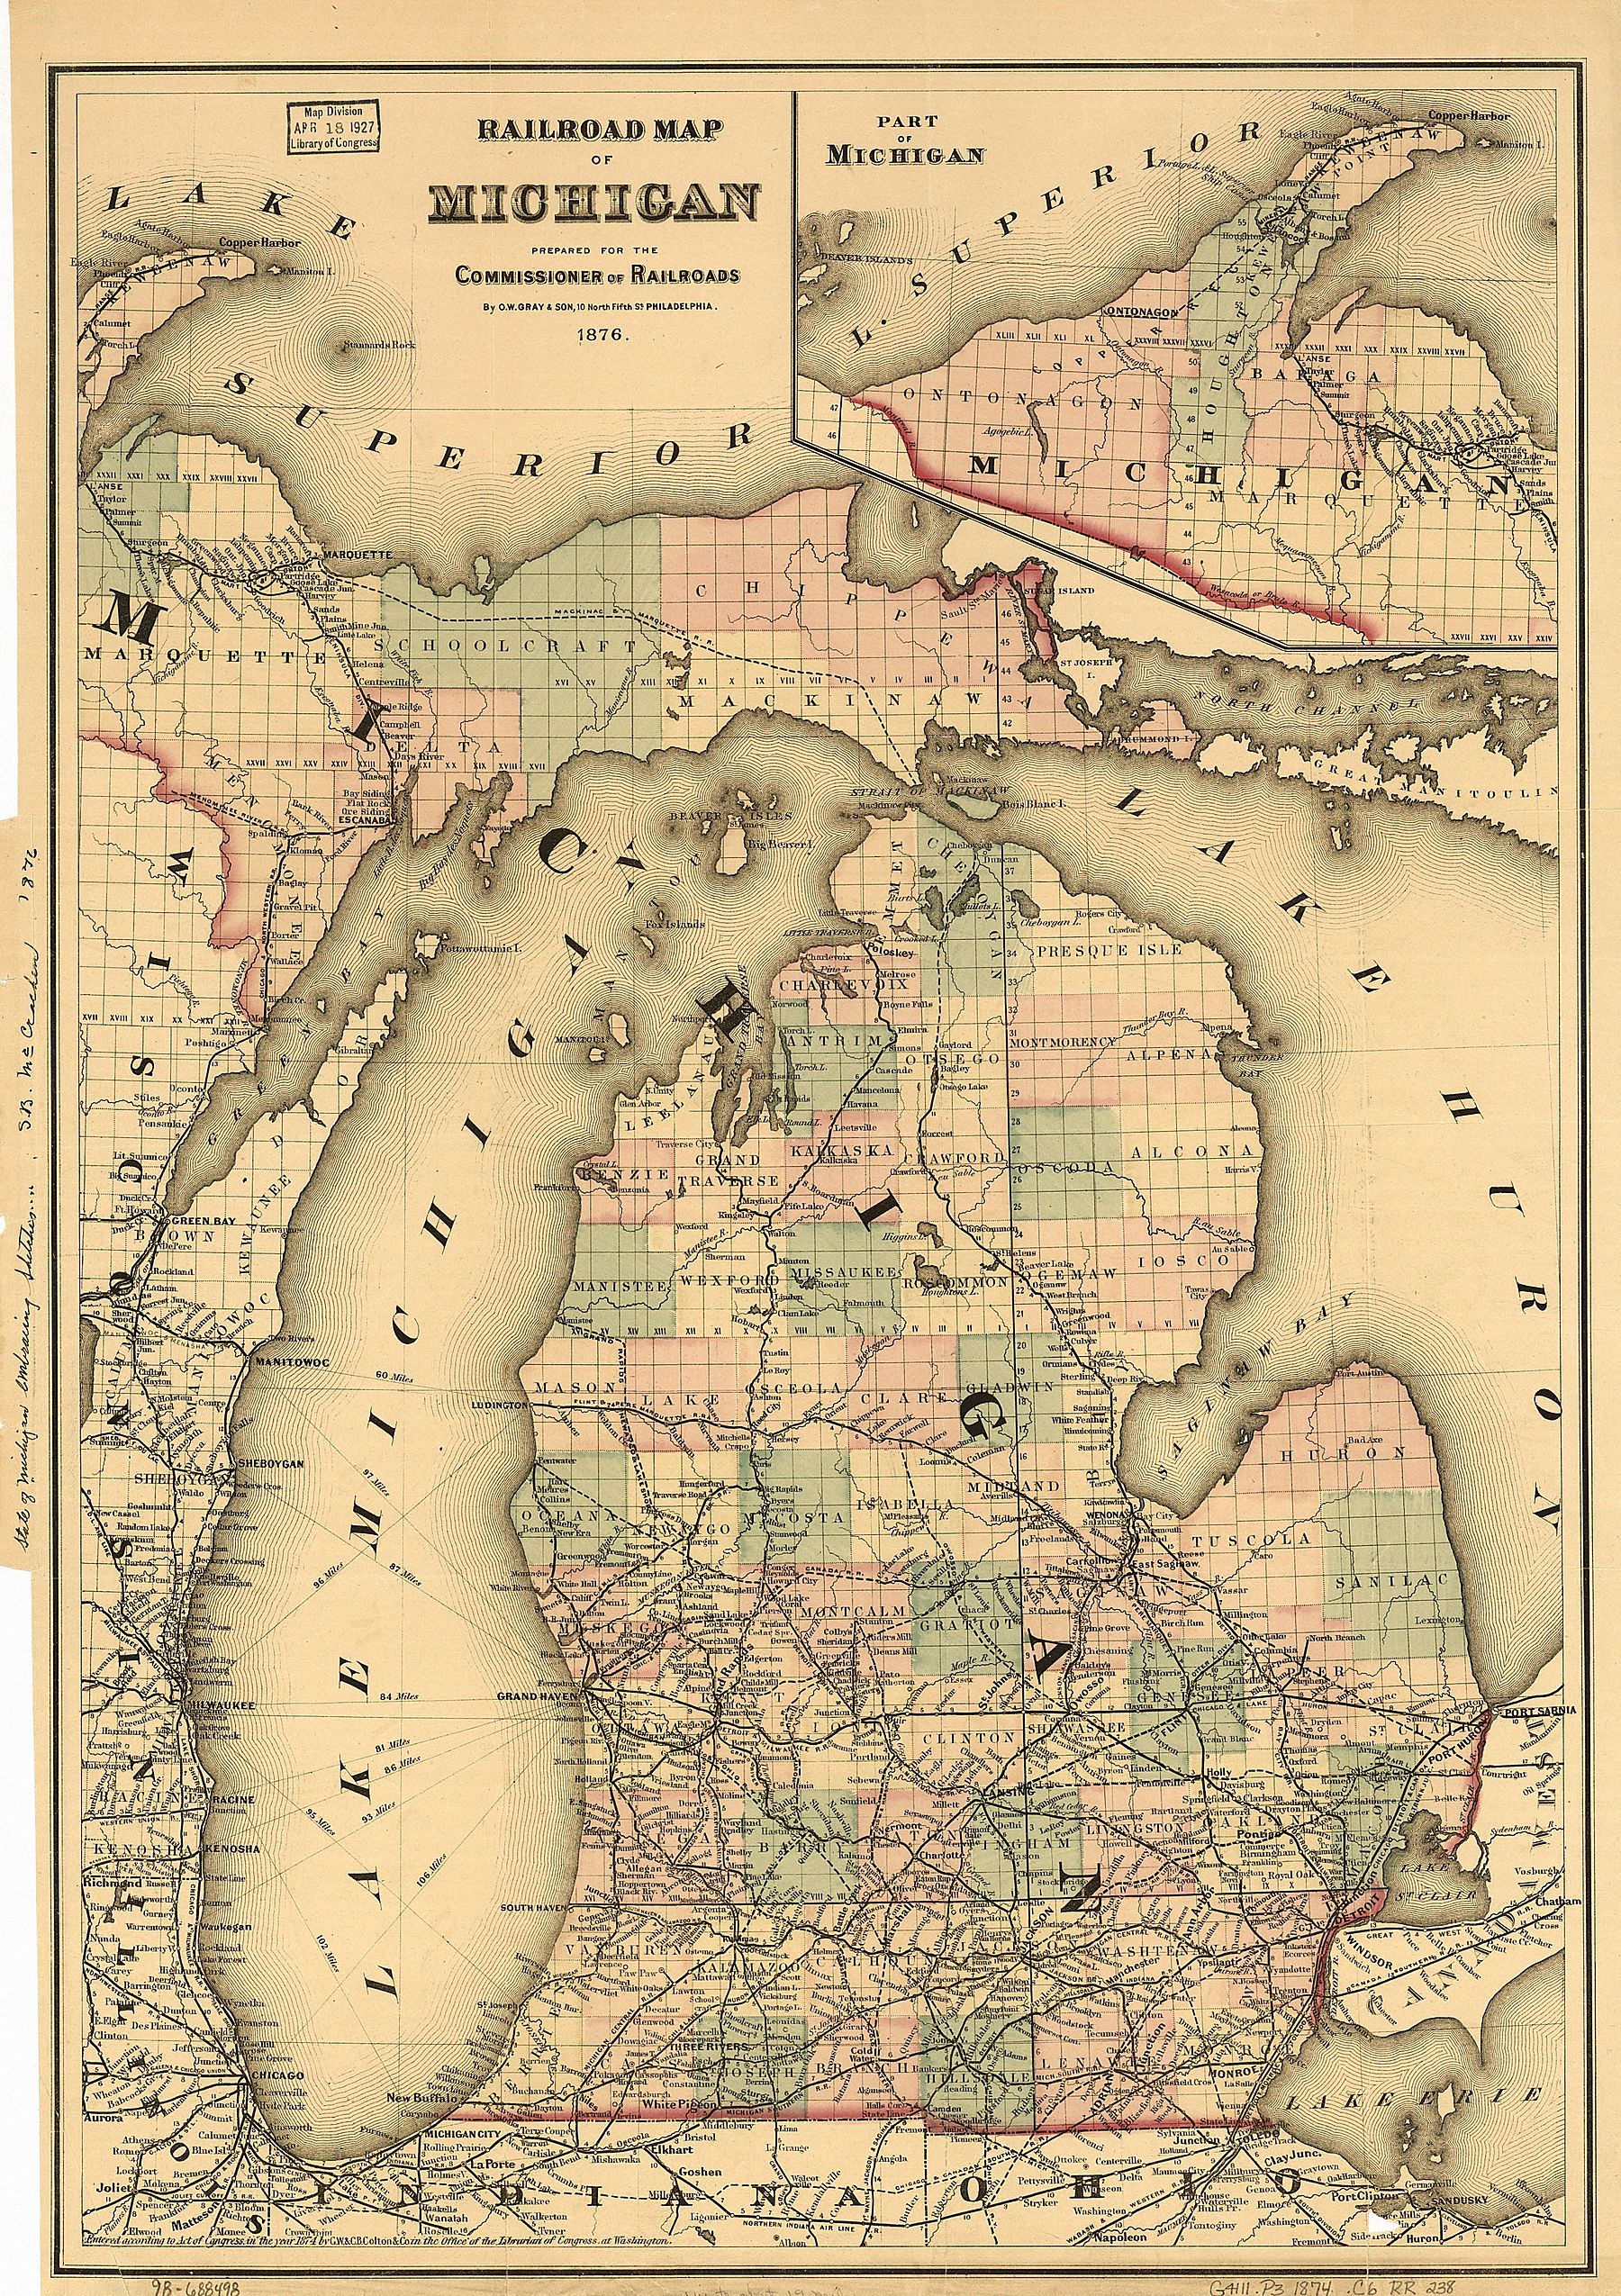 Charlevoix became the county seat in 1869 when Charlevoix County was formed, but by 1876, the Grand Rapids and Indiana Railroad had built a line north to Petoskey with stops in Boyne Falls and Melrose. This link to cities in lower Michigan brought increased population to Charlevoix County, and new political power to the eastern part of the county.